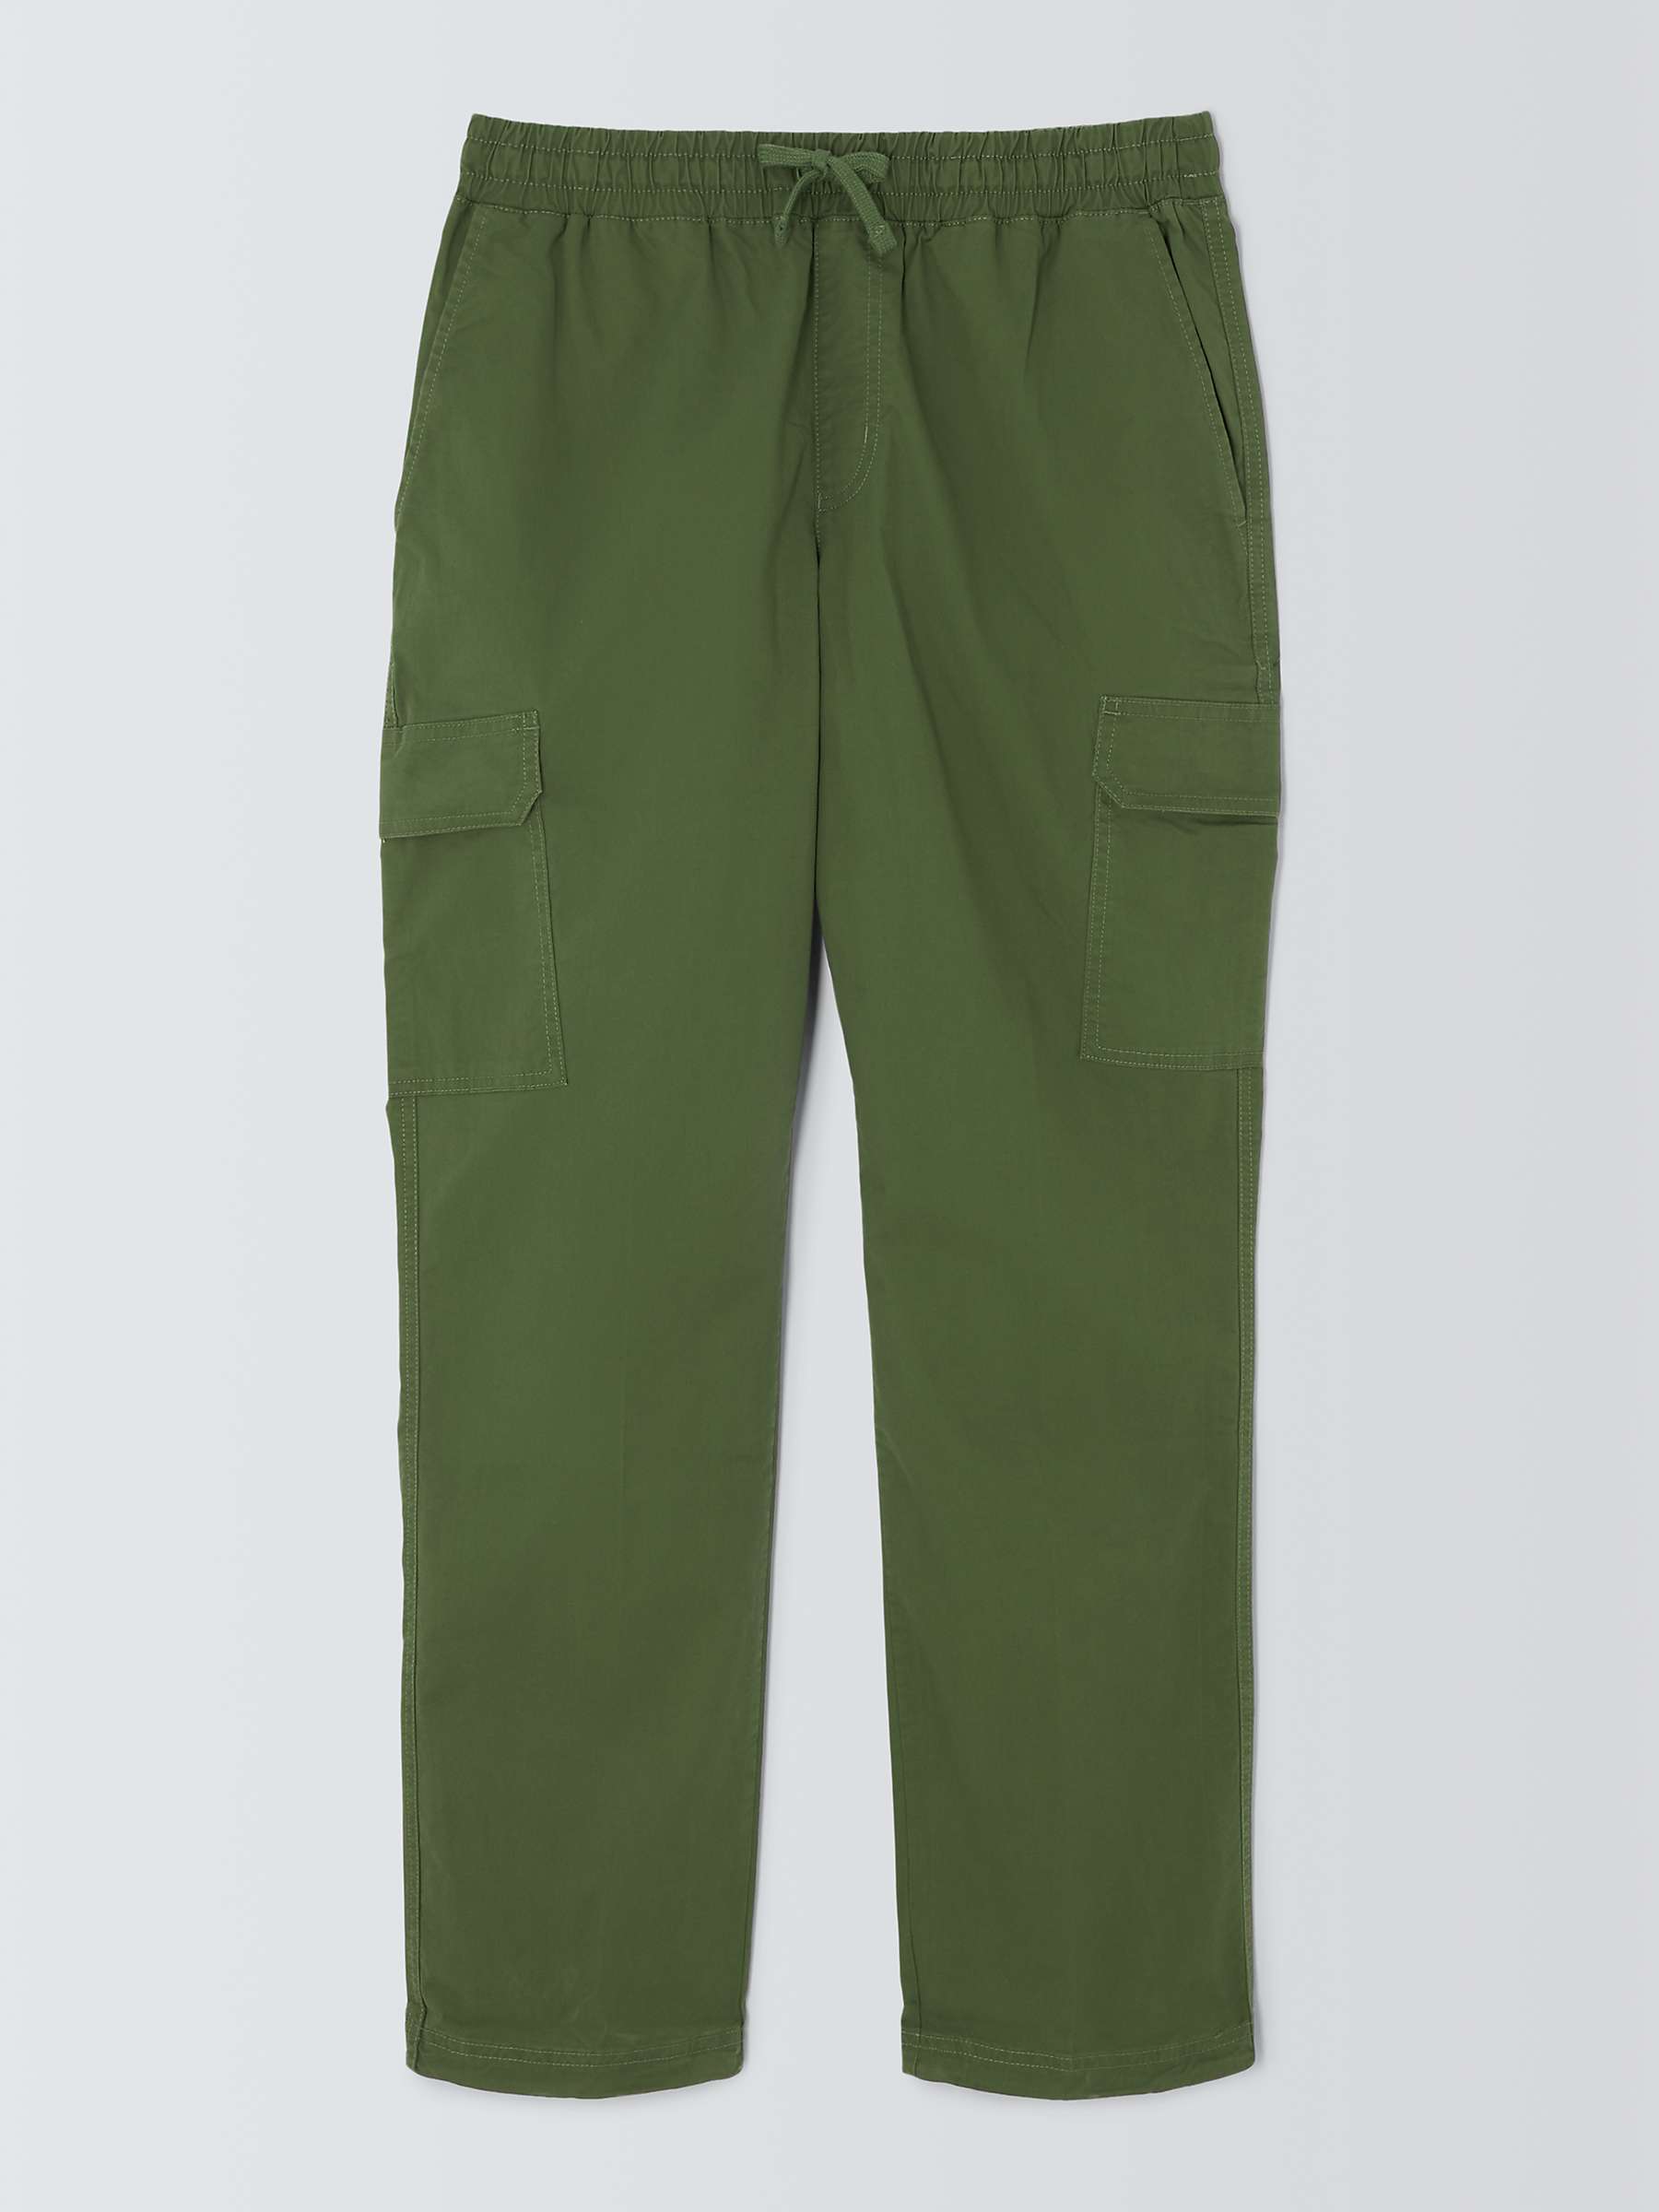 Buy Columbia Rapid River Cargo Trousers Online at johnlewis.com